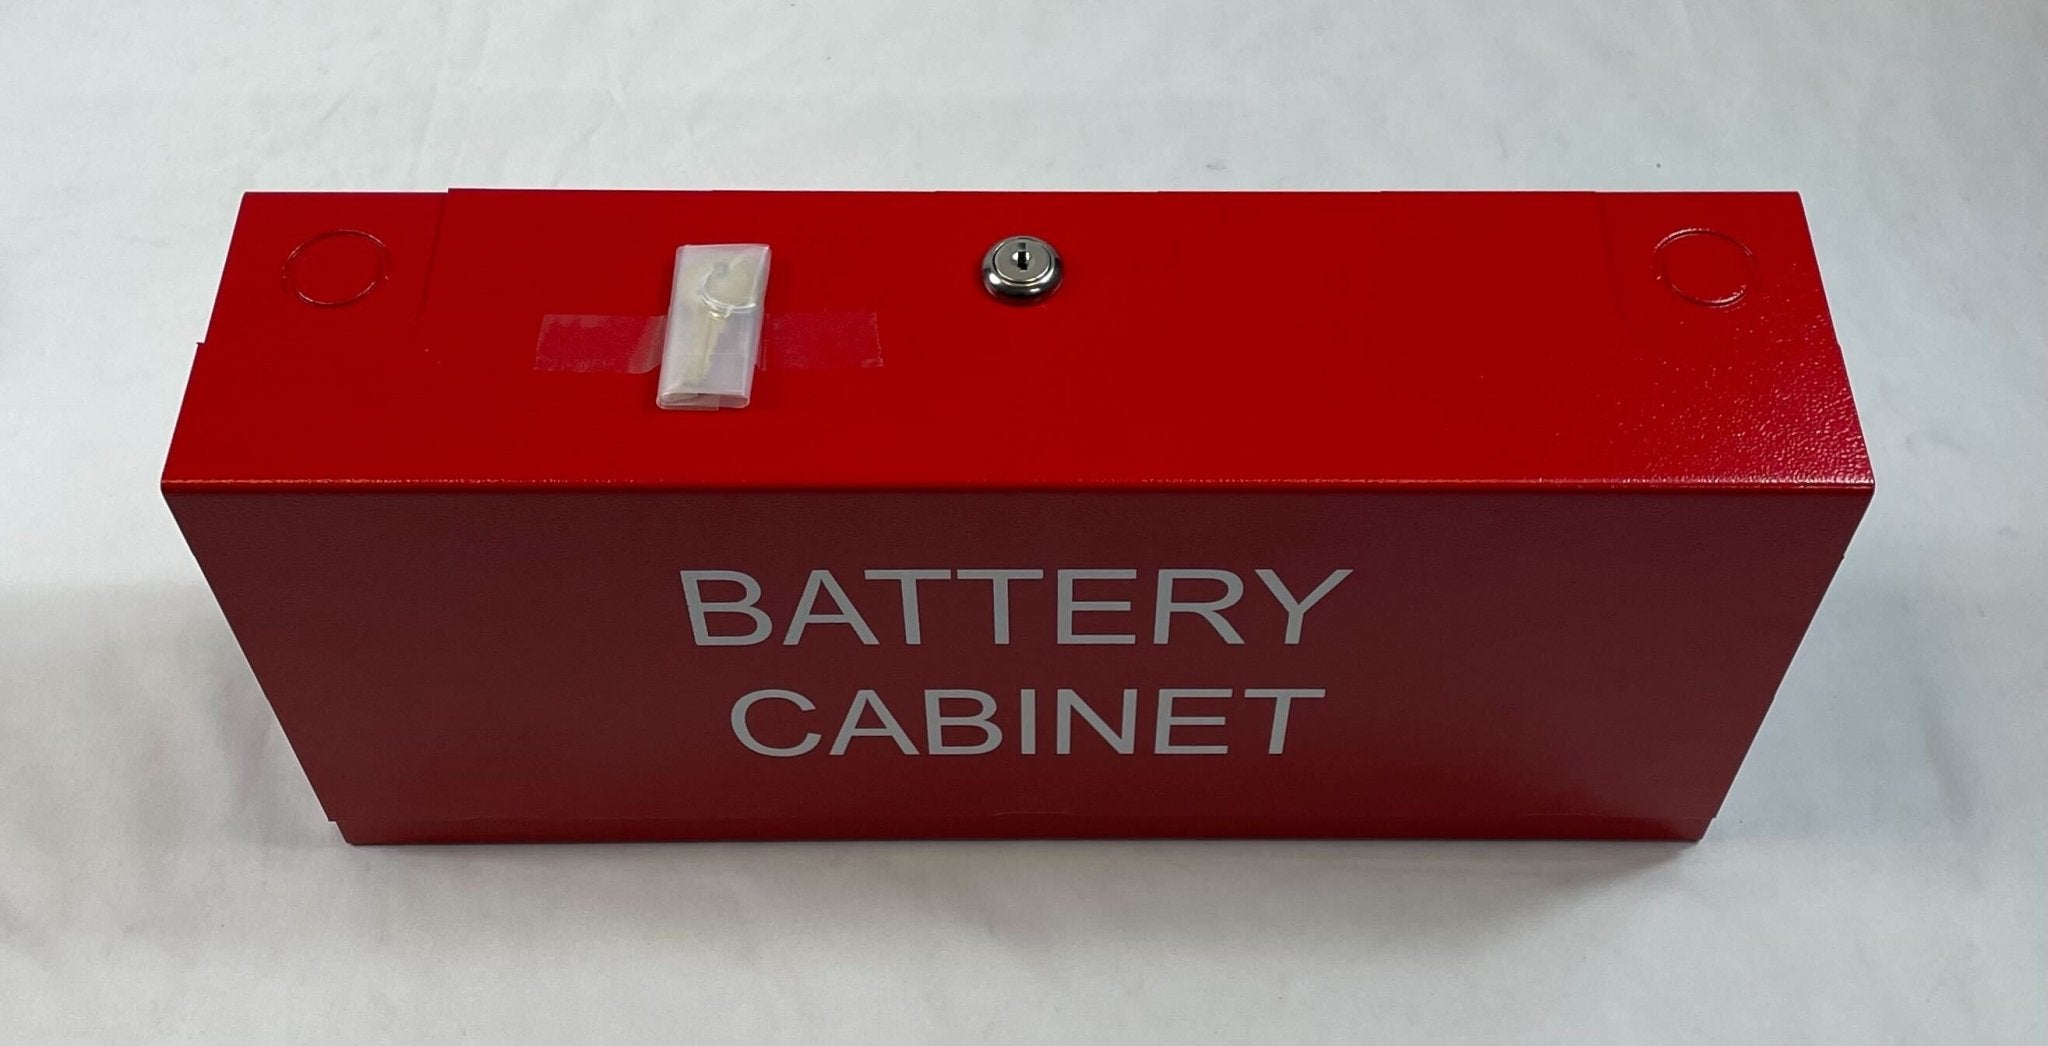 Space Age SSU00505 Mini Battery Cabinet Red - The Fire Alarm Supplier